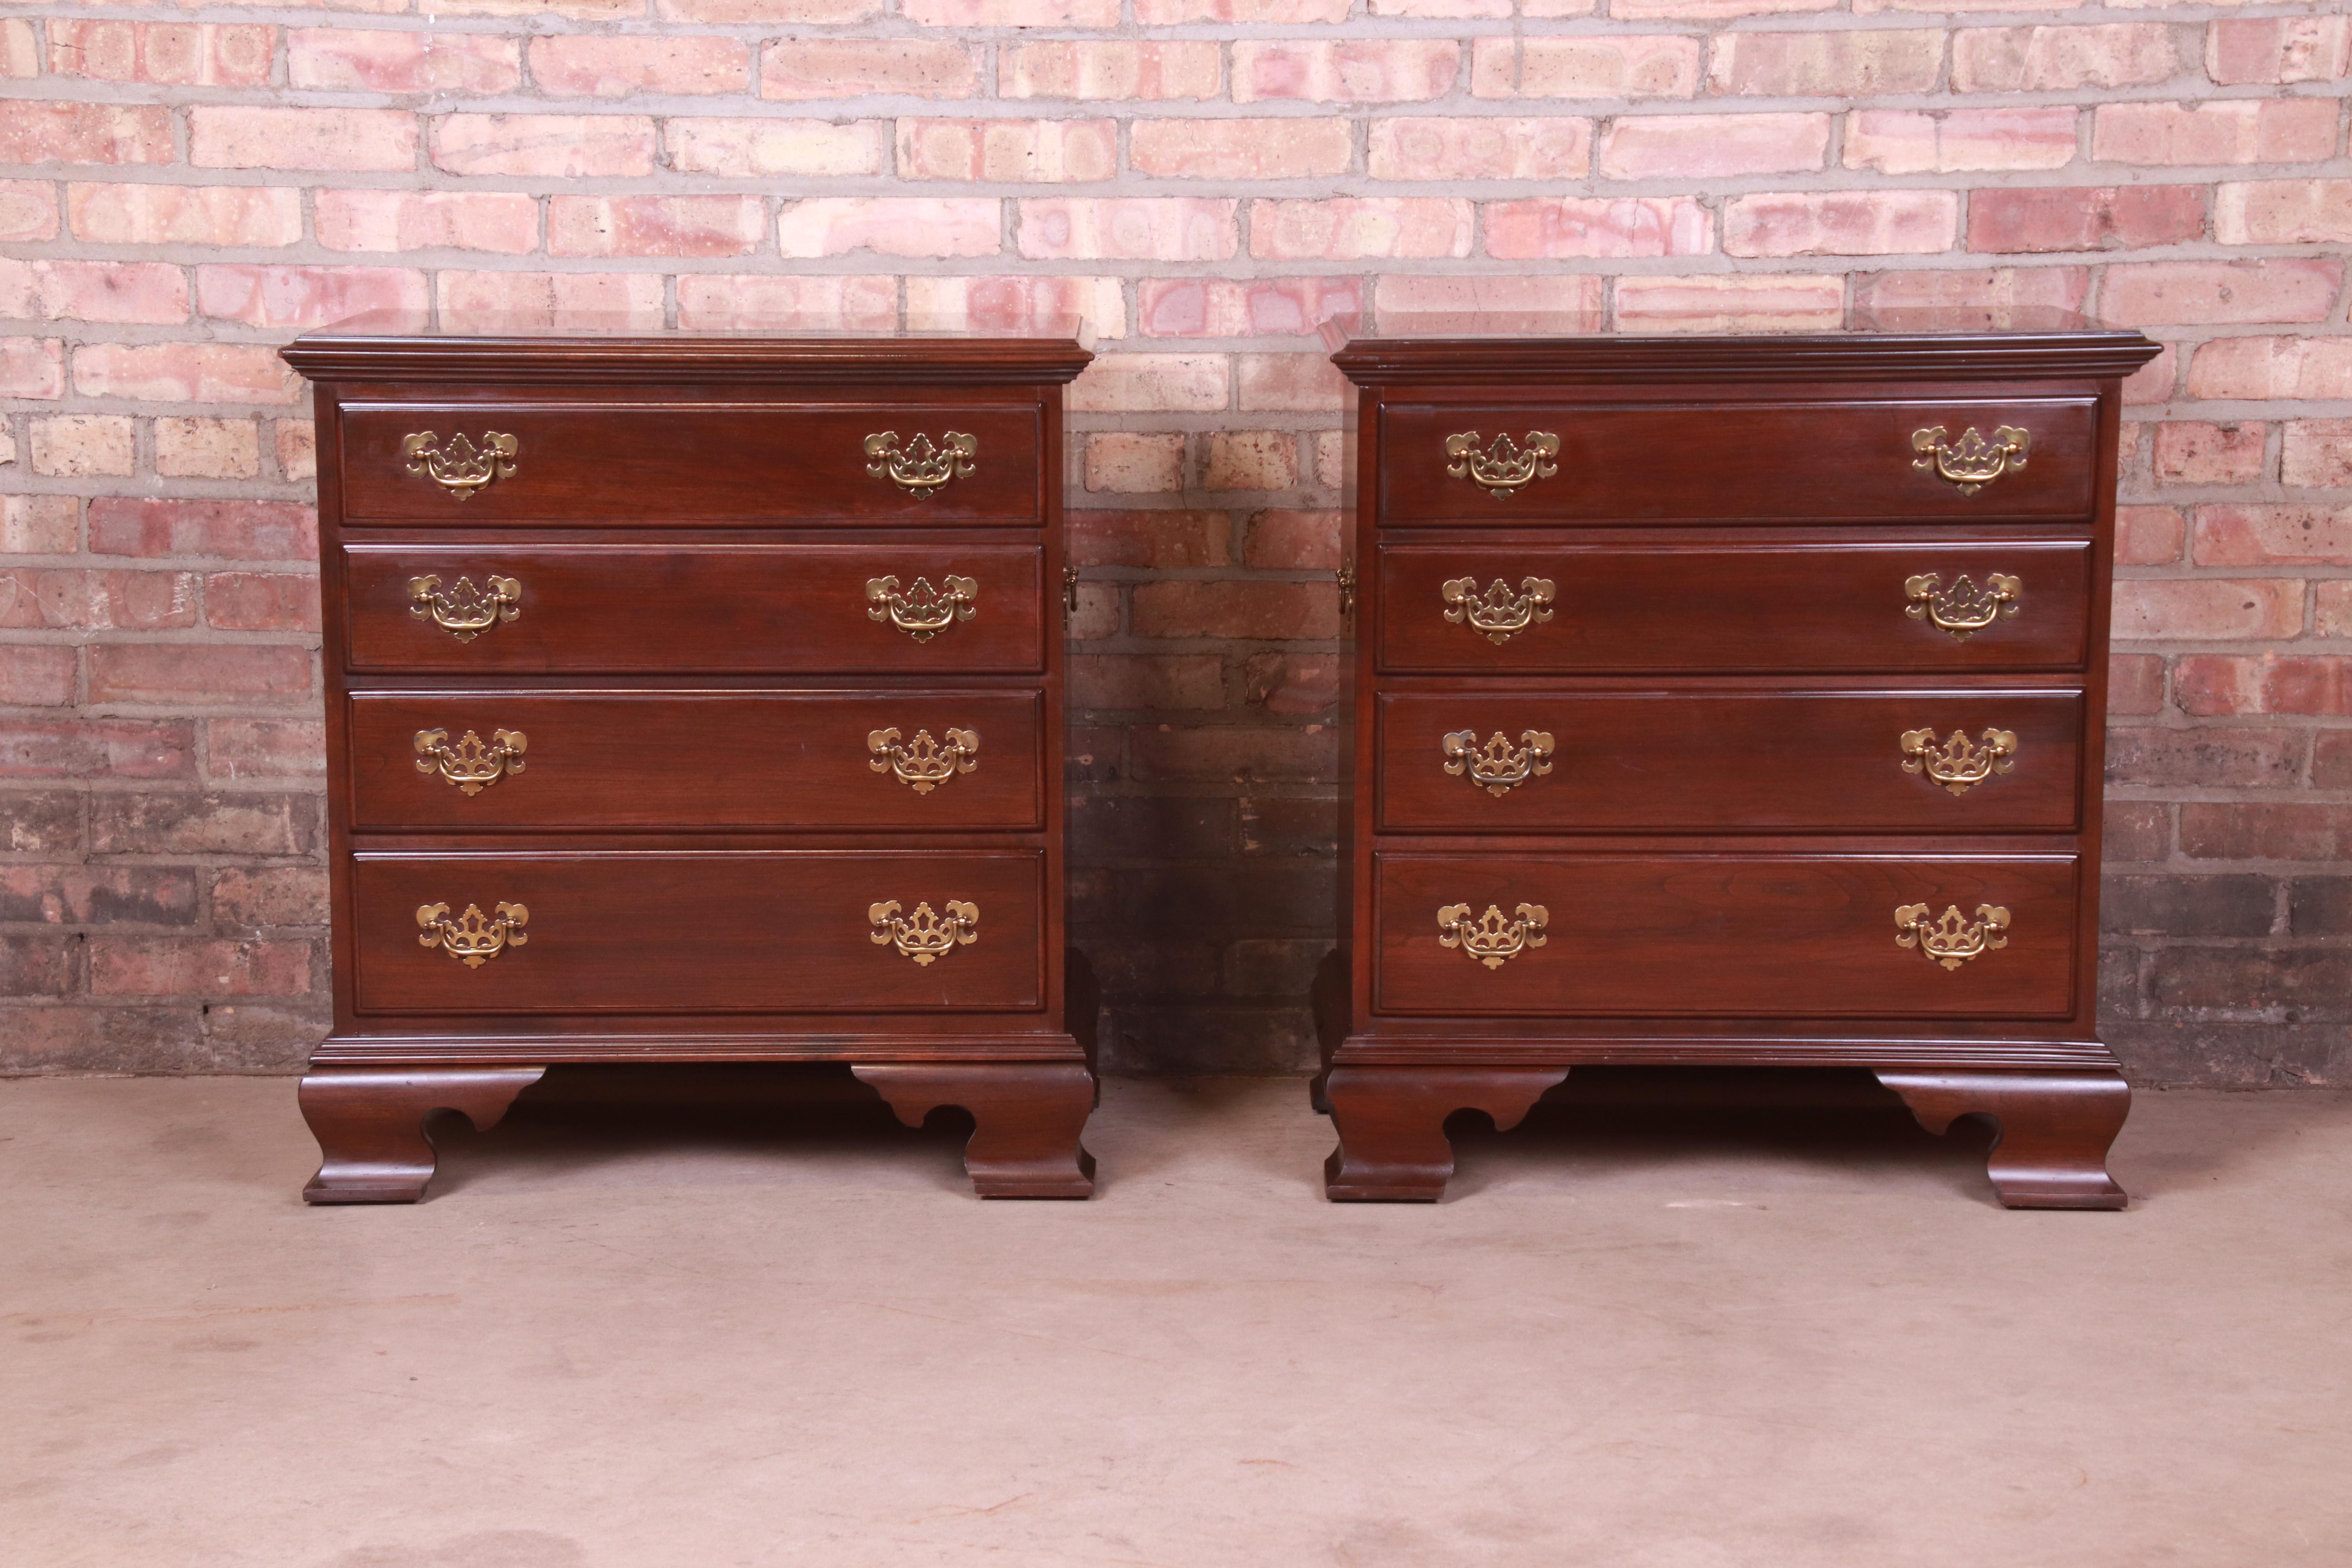 American Ethan Allen Georgian Mahogany Four-Drawer Bedside Chests, Pair